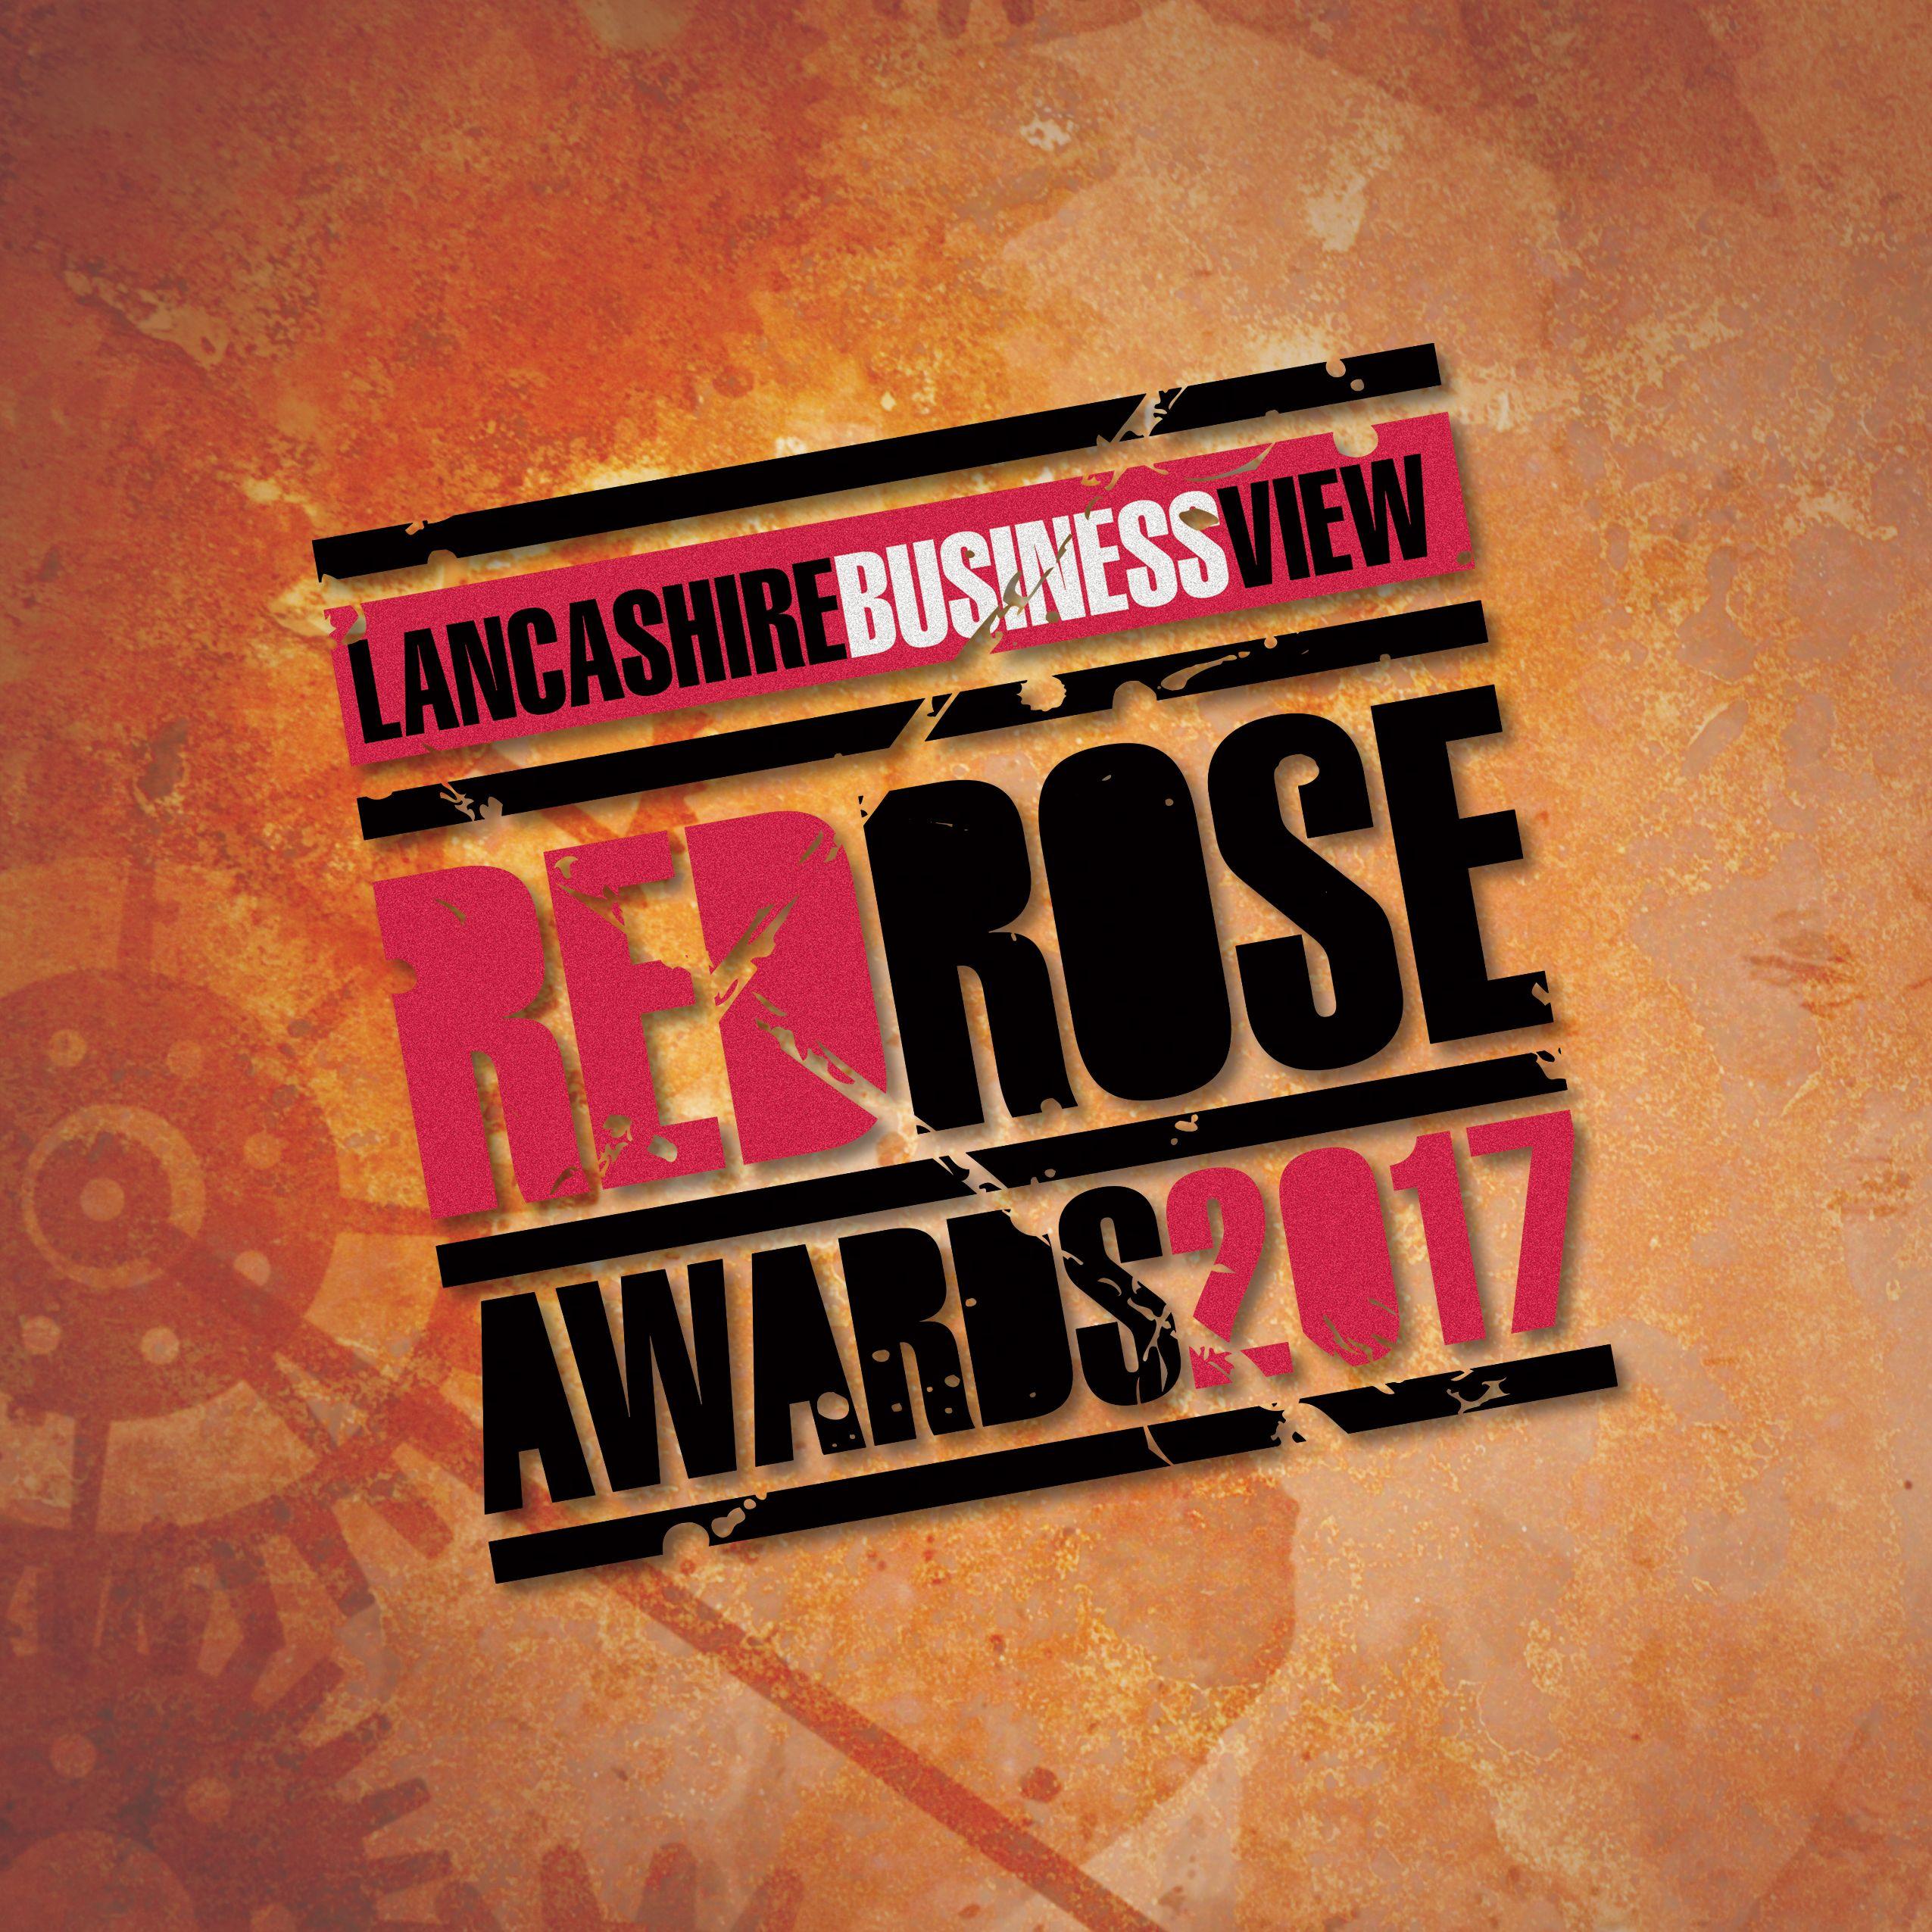 Red Award Logo - Red Rose Awards 2017 launched! - Lancashire Business View